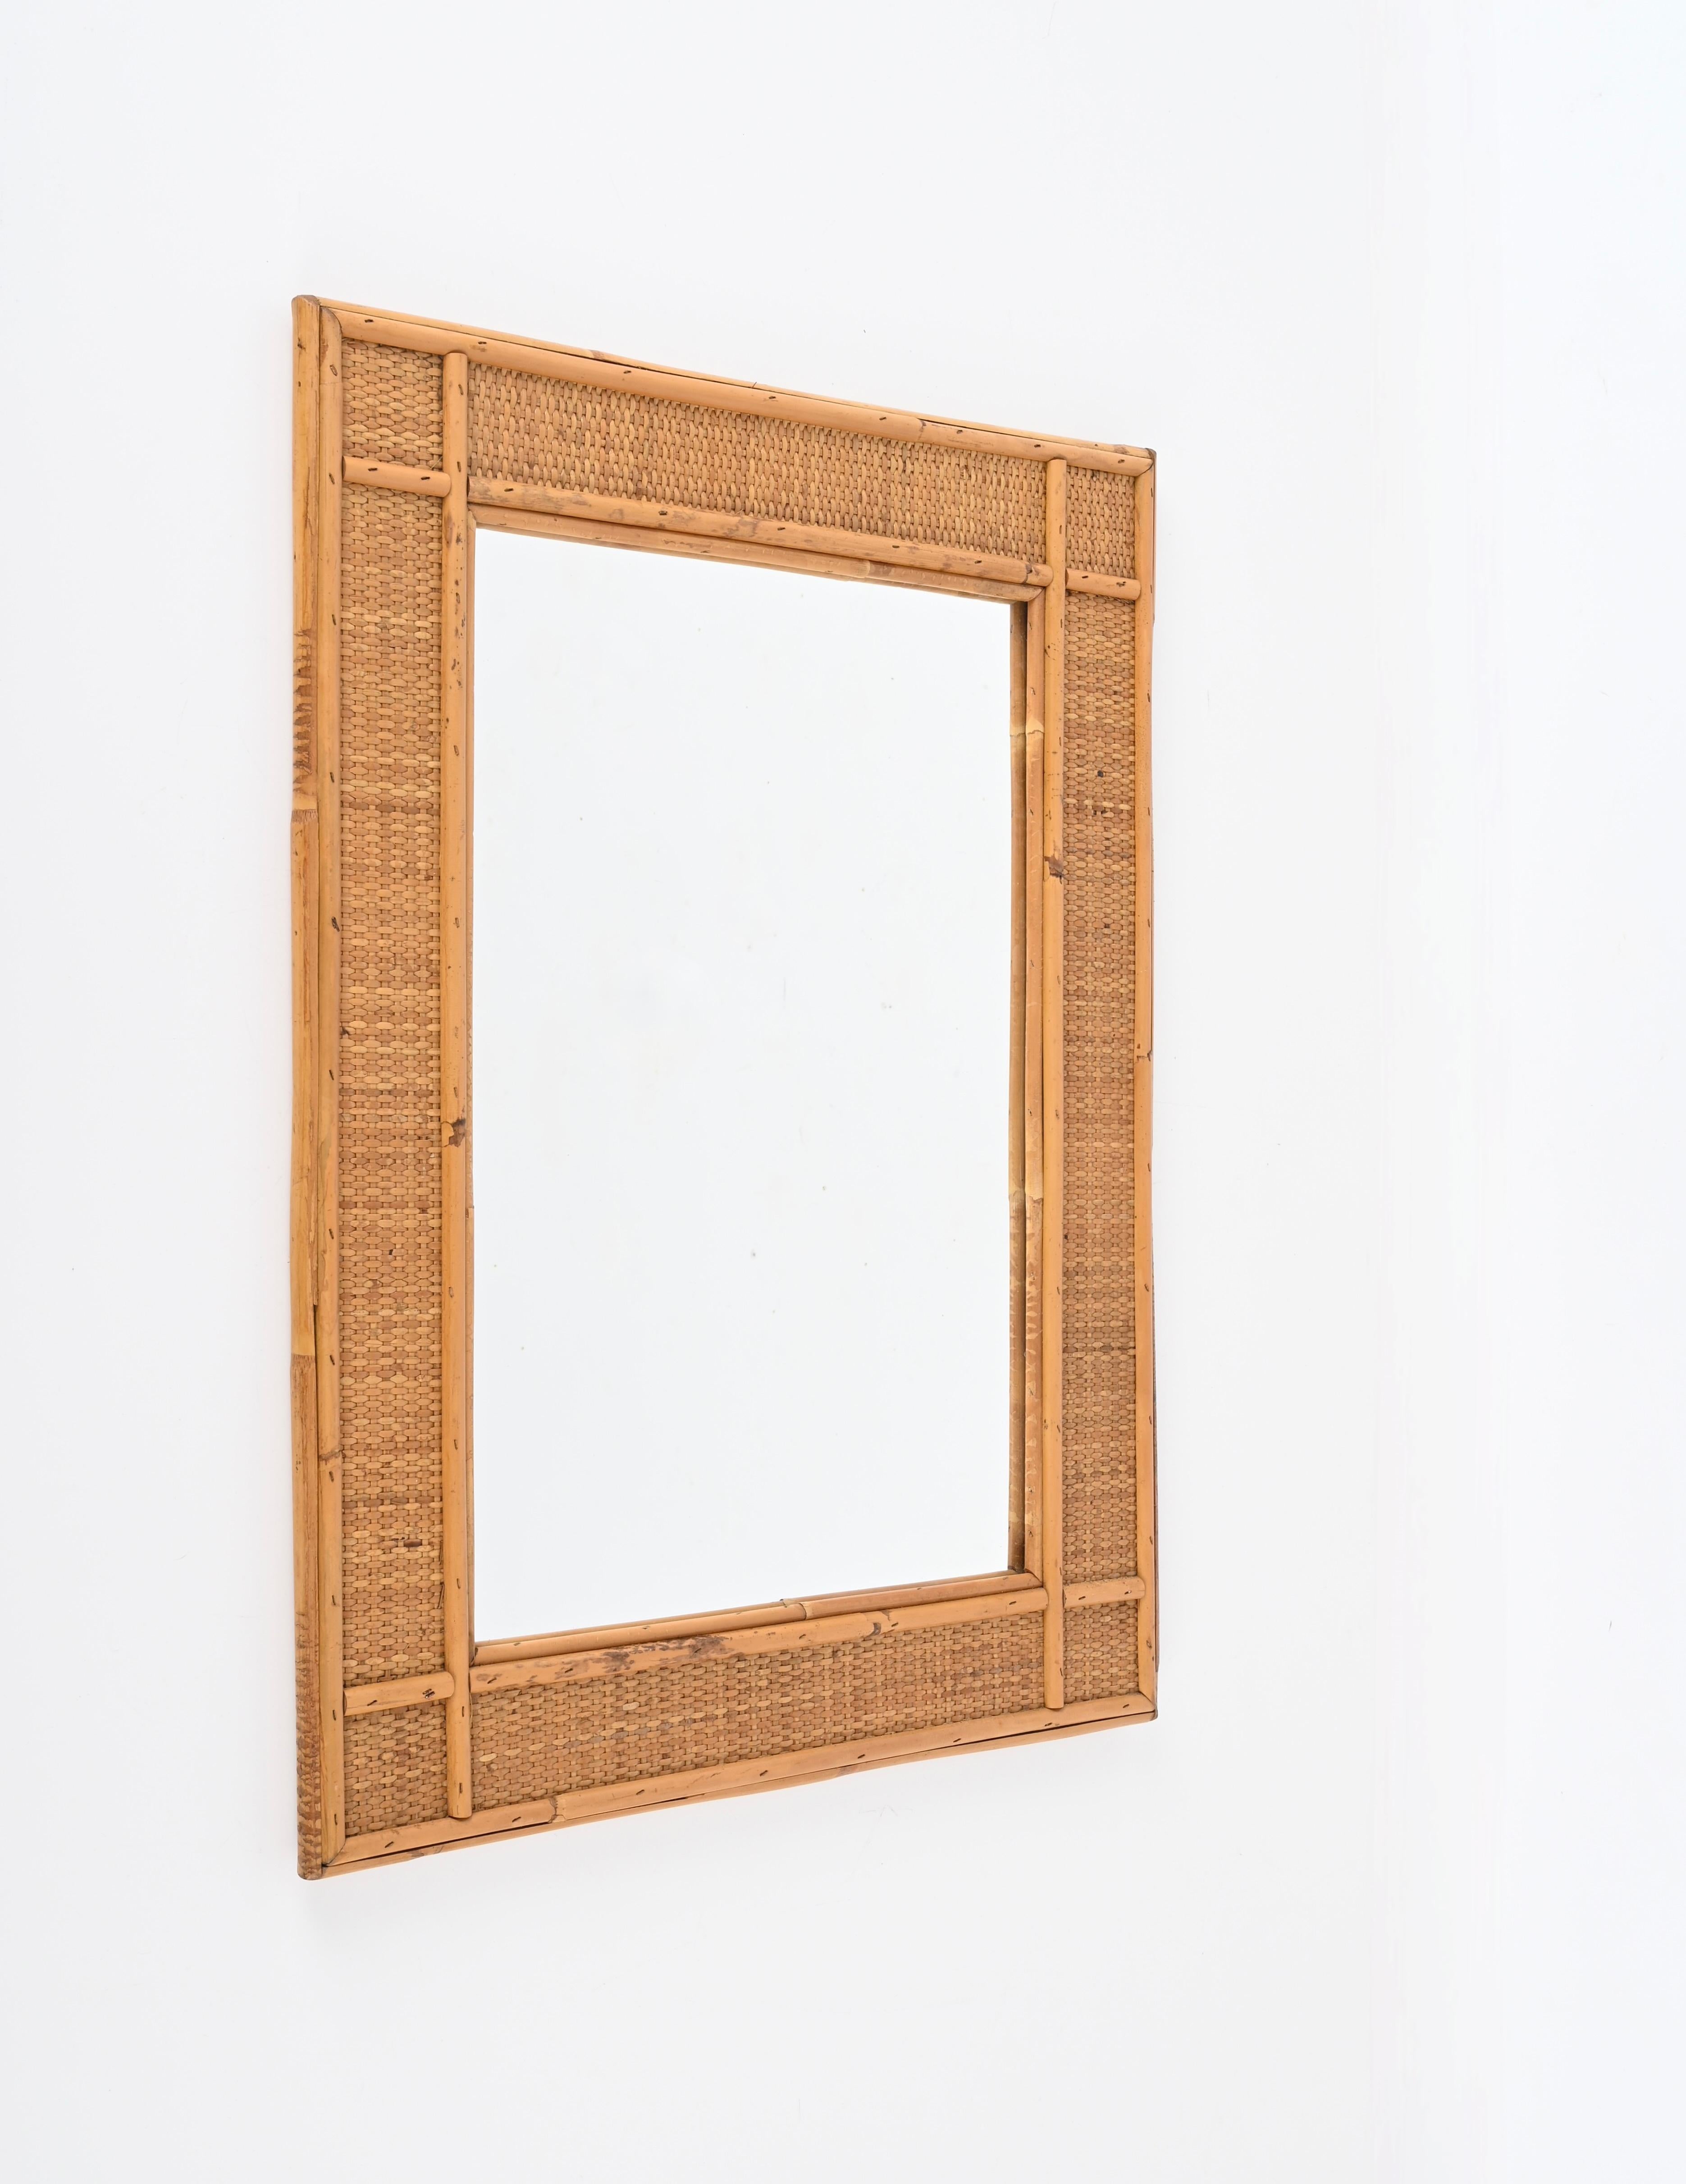 Midcentury Rectangular  Bamboo and Woven Rattan Wicker Mirror, Italy 1970s For Sale 3